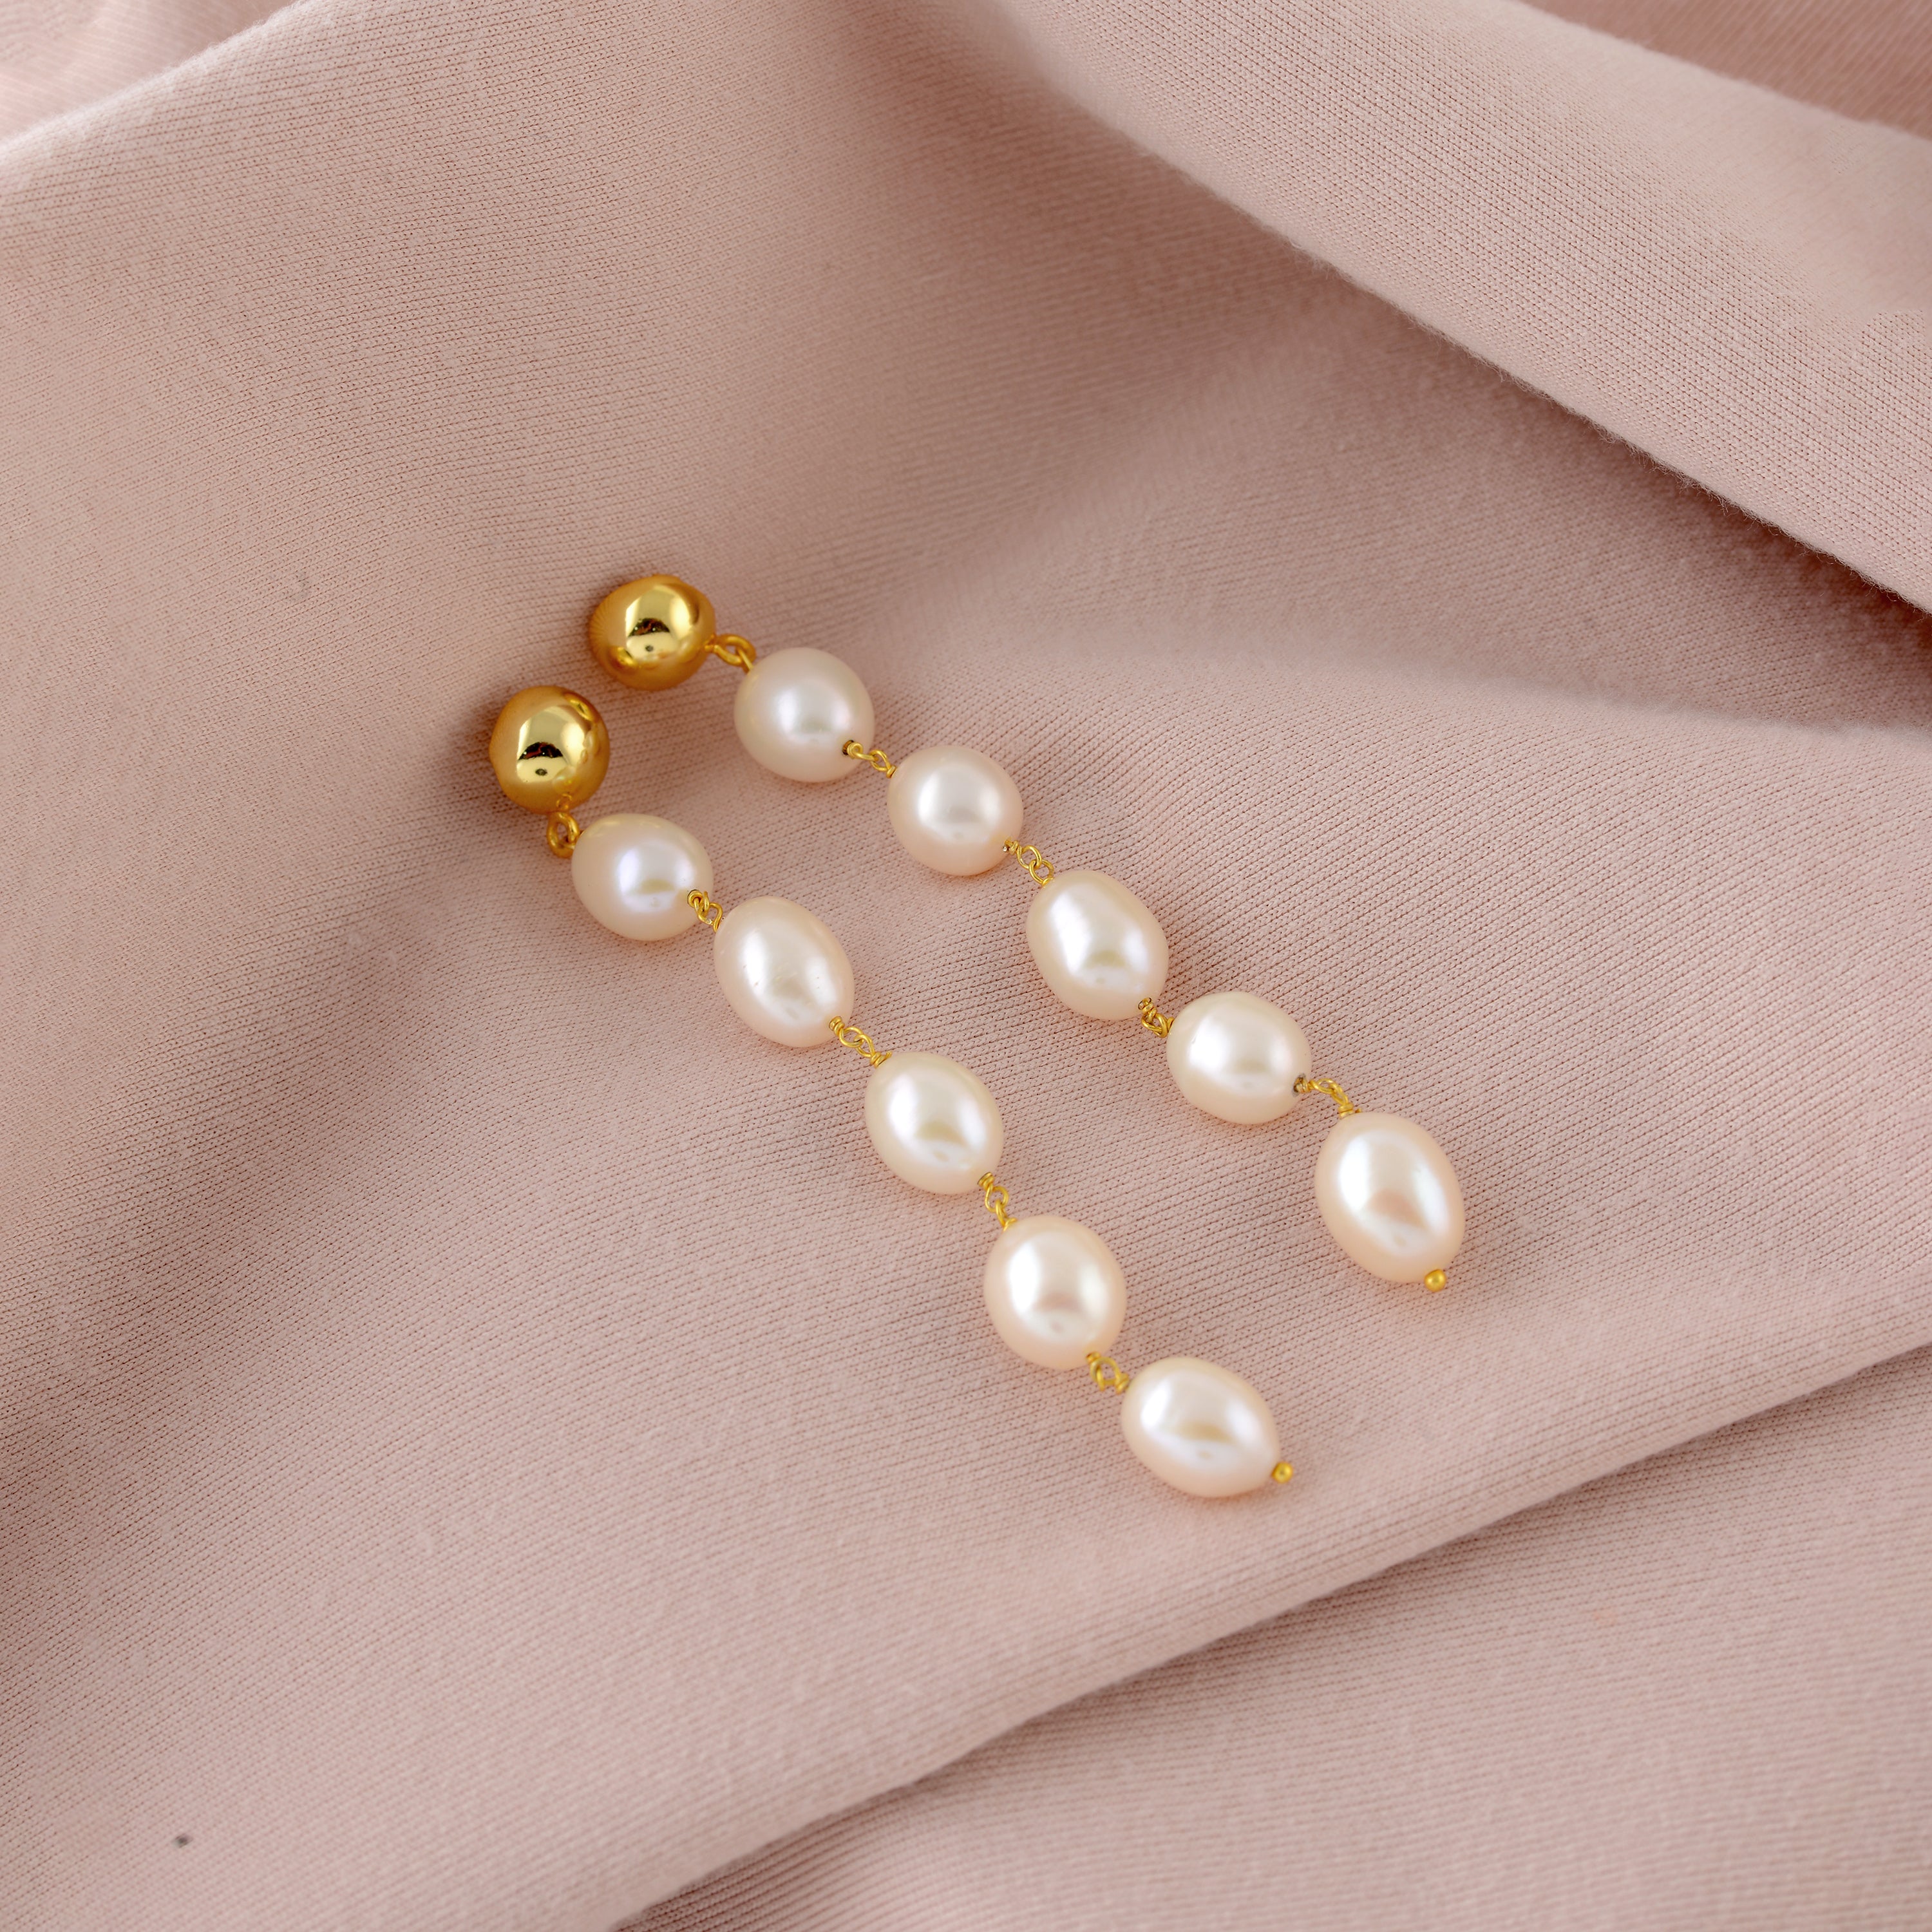 Cultured Pearl Earrings in Gold Plated Sterling Silver